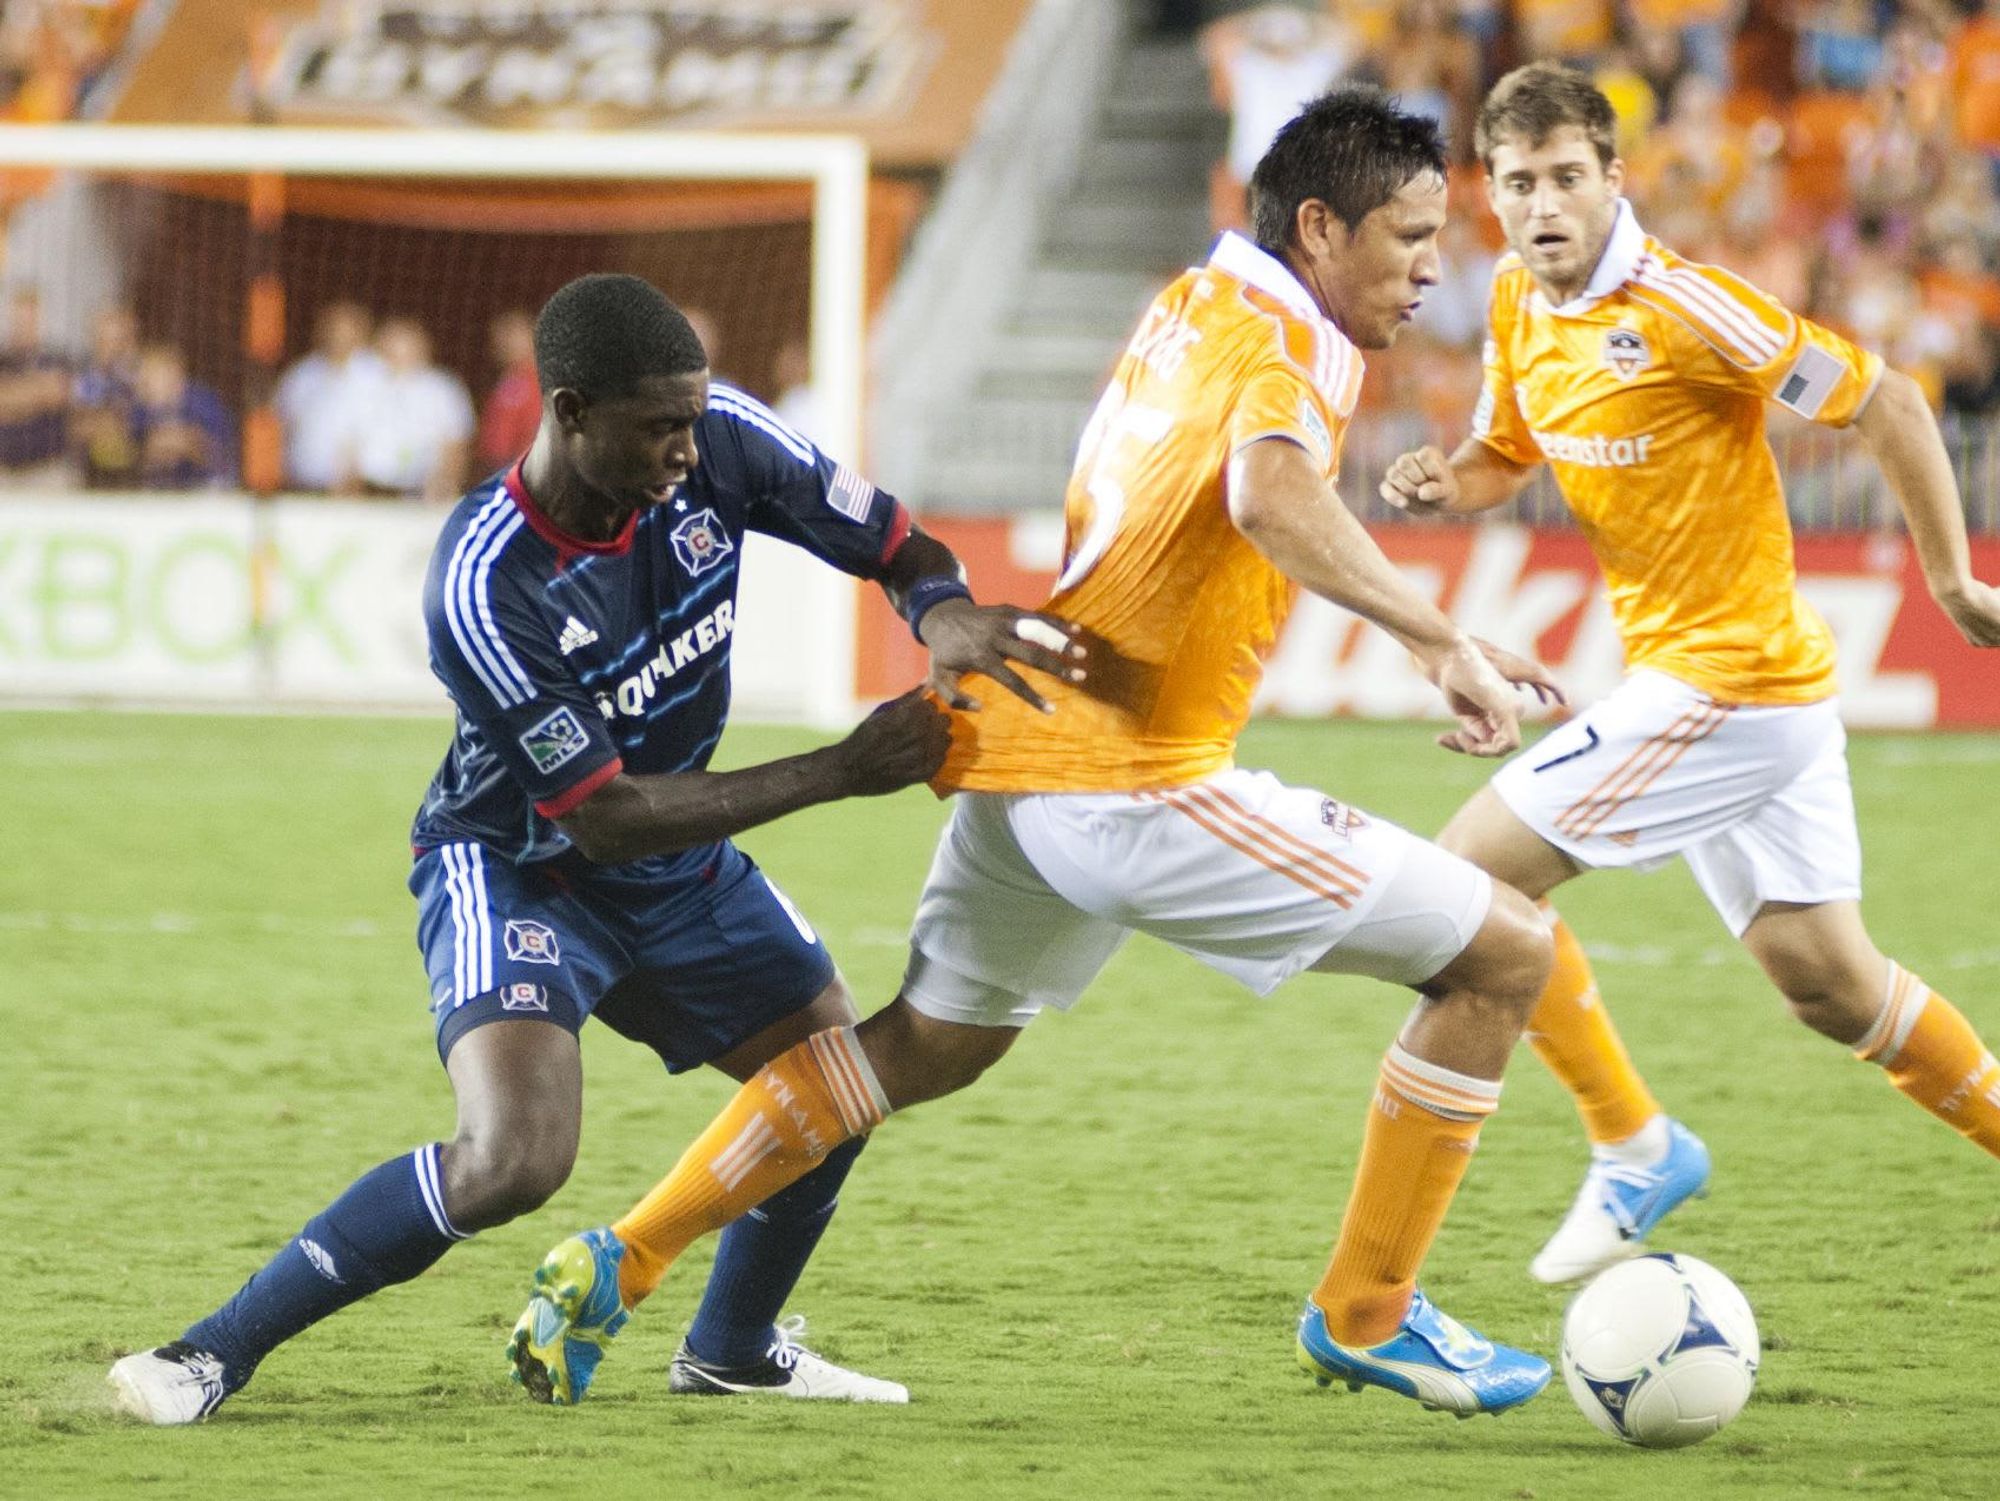 Dynamo vs. Chicago Fire, July 3, 2012, soccer, NAME, Brian Ching, NAME